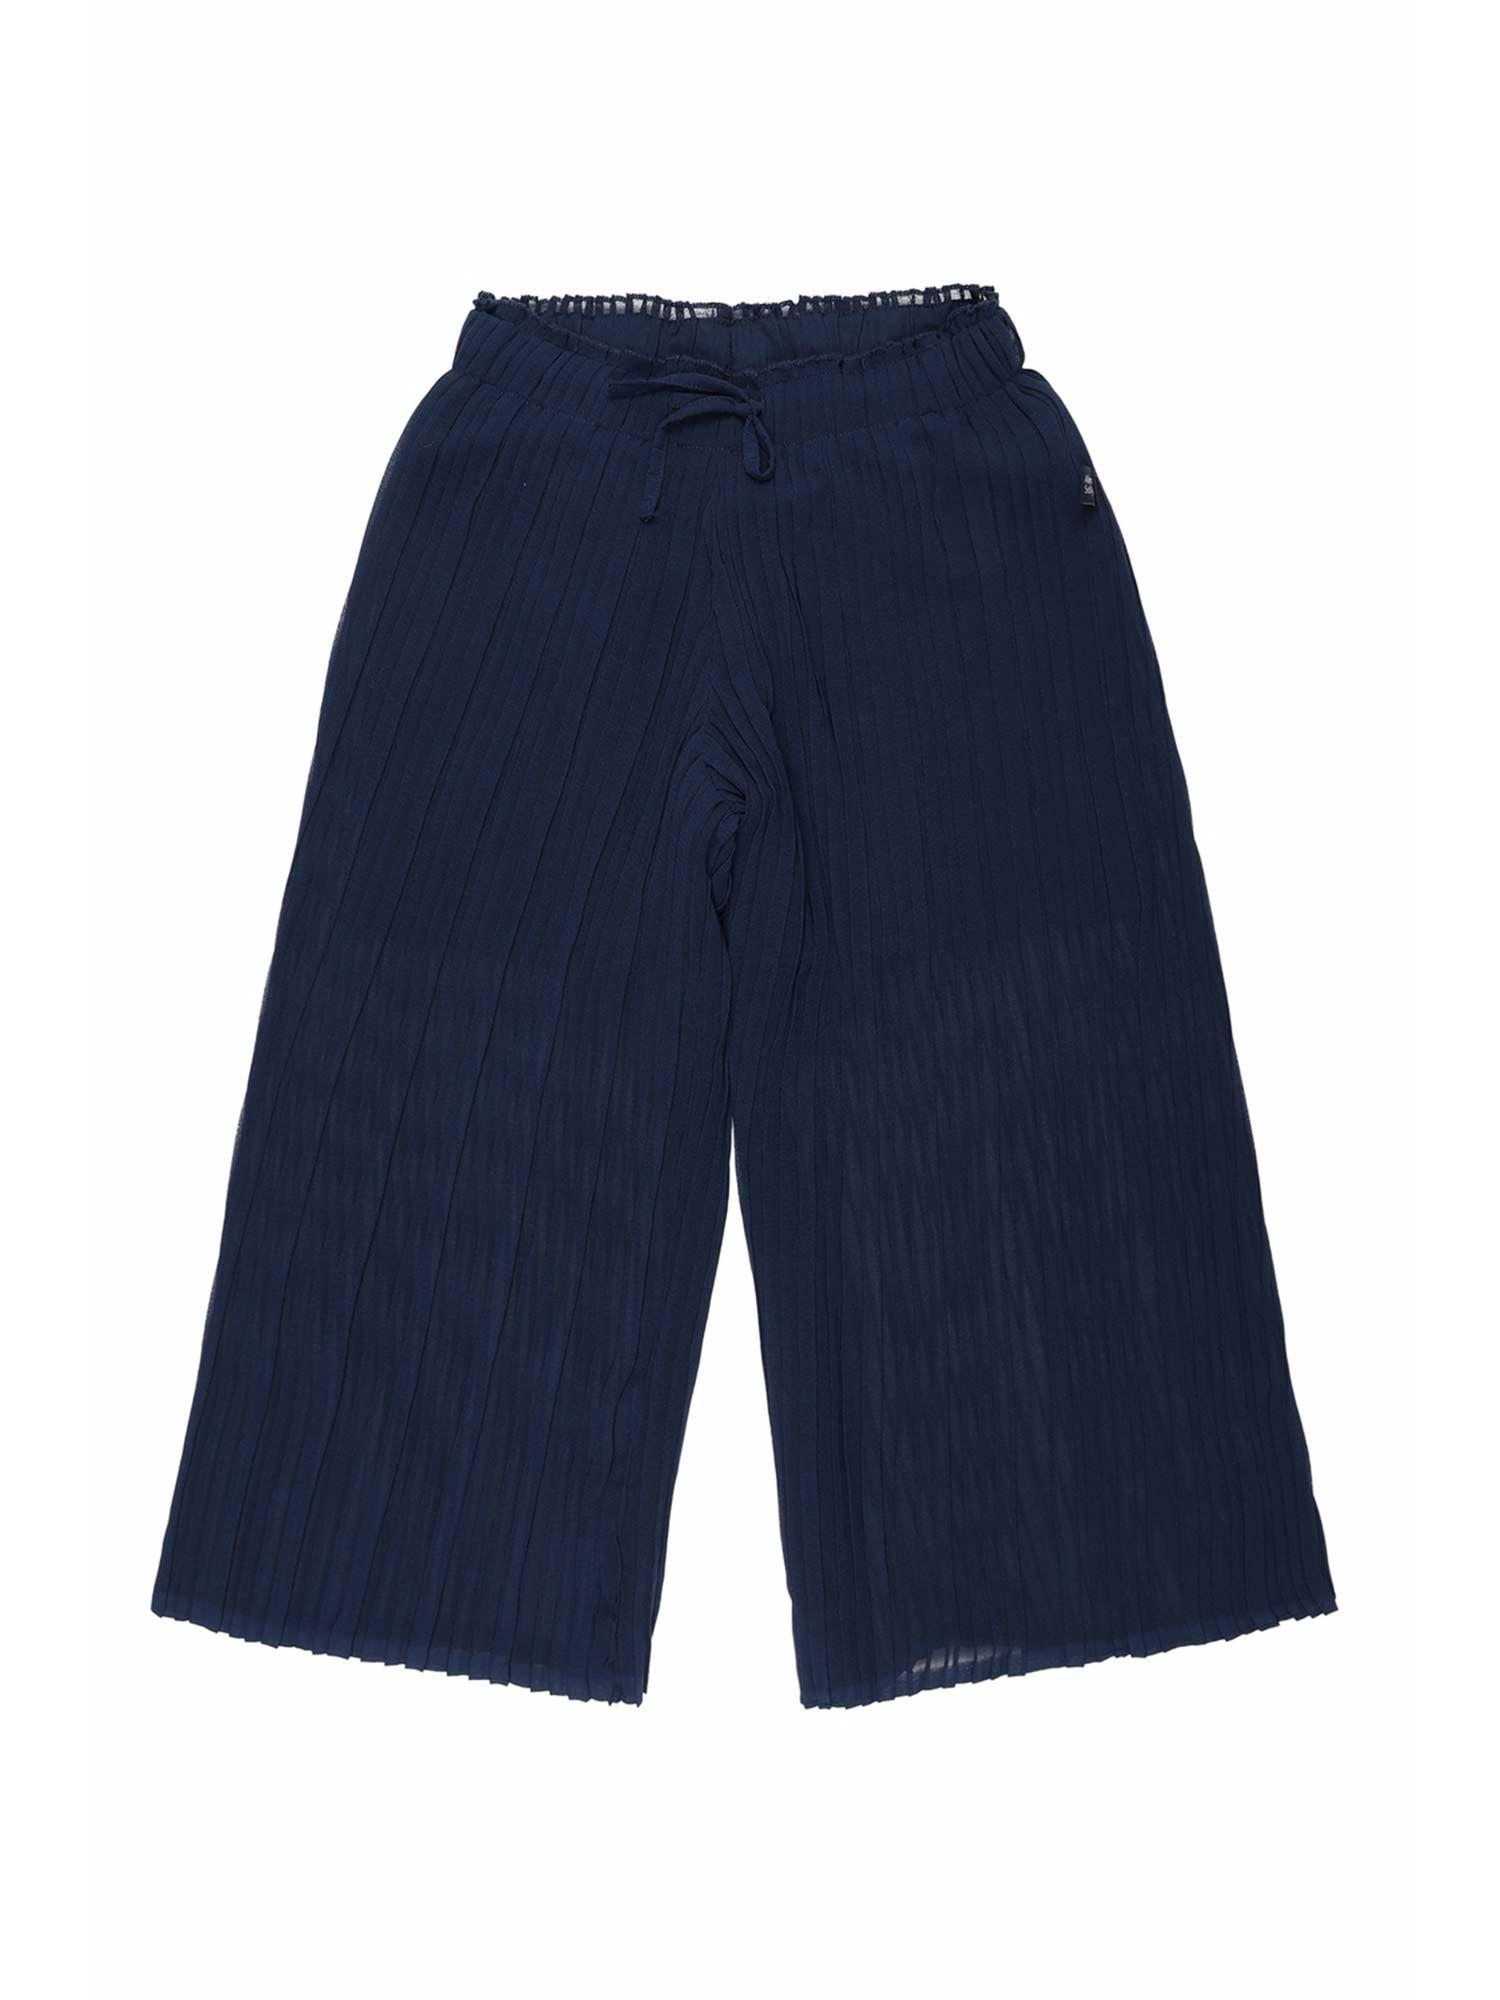 girls navy blue solid trousers